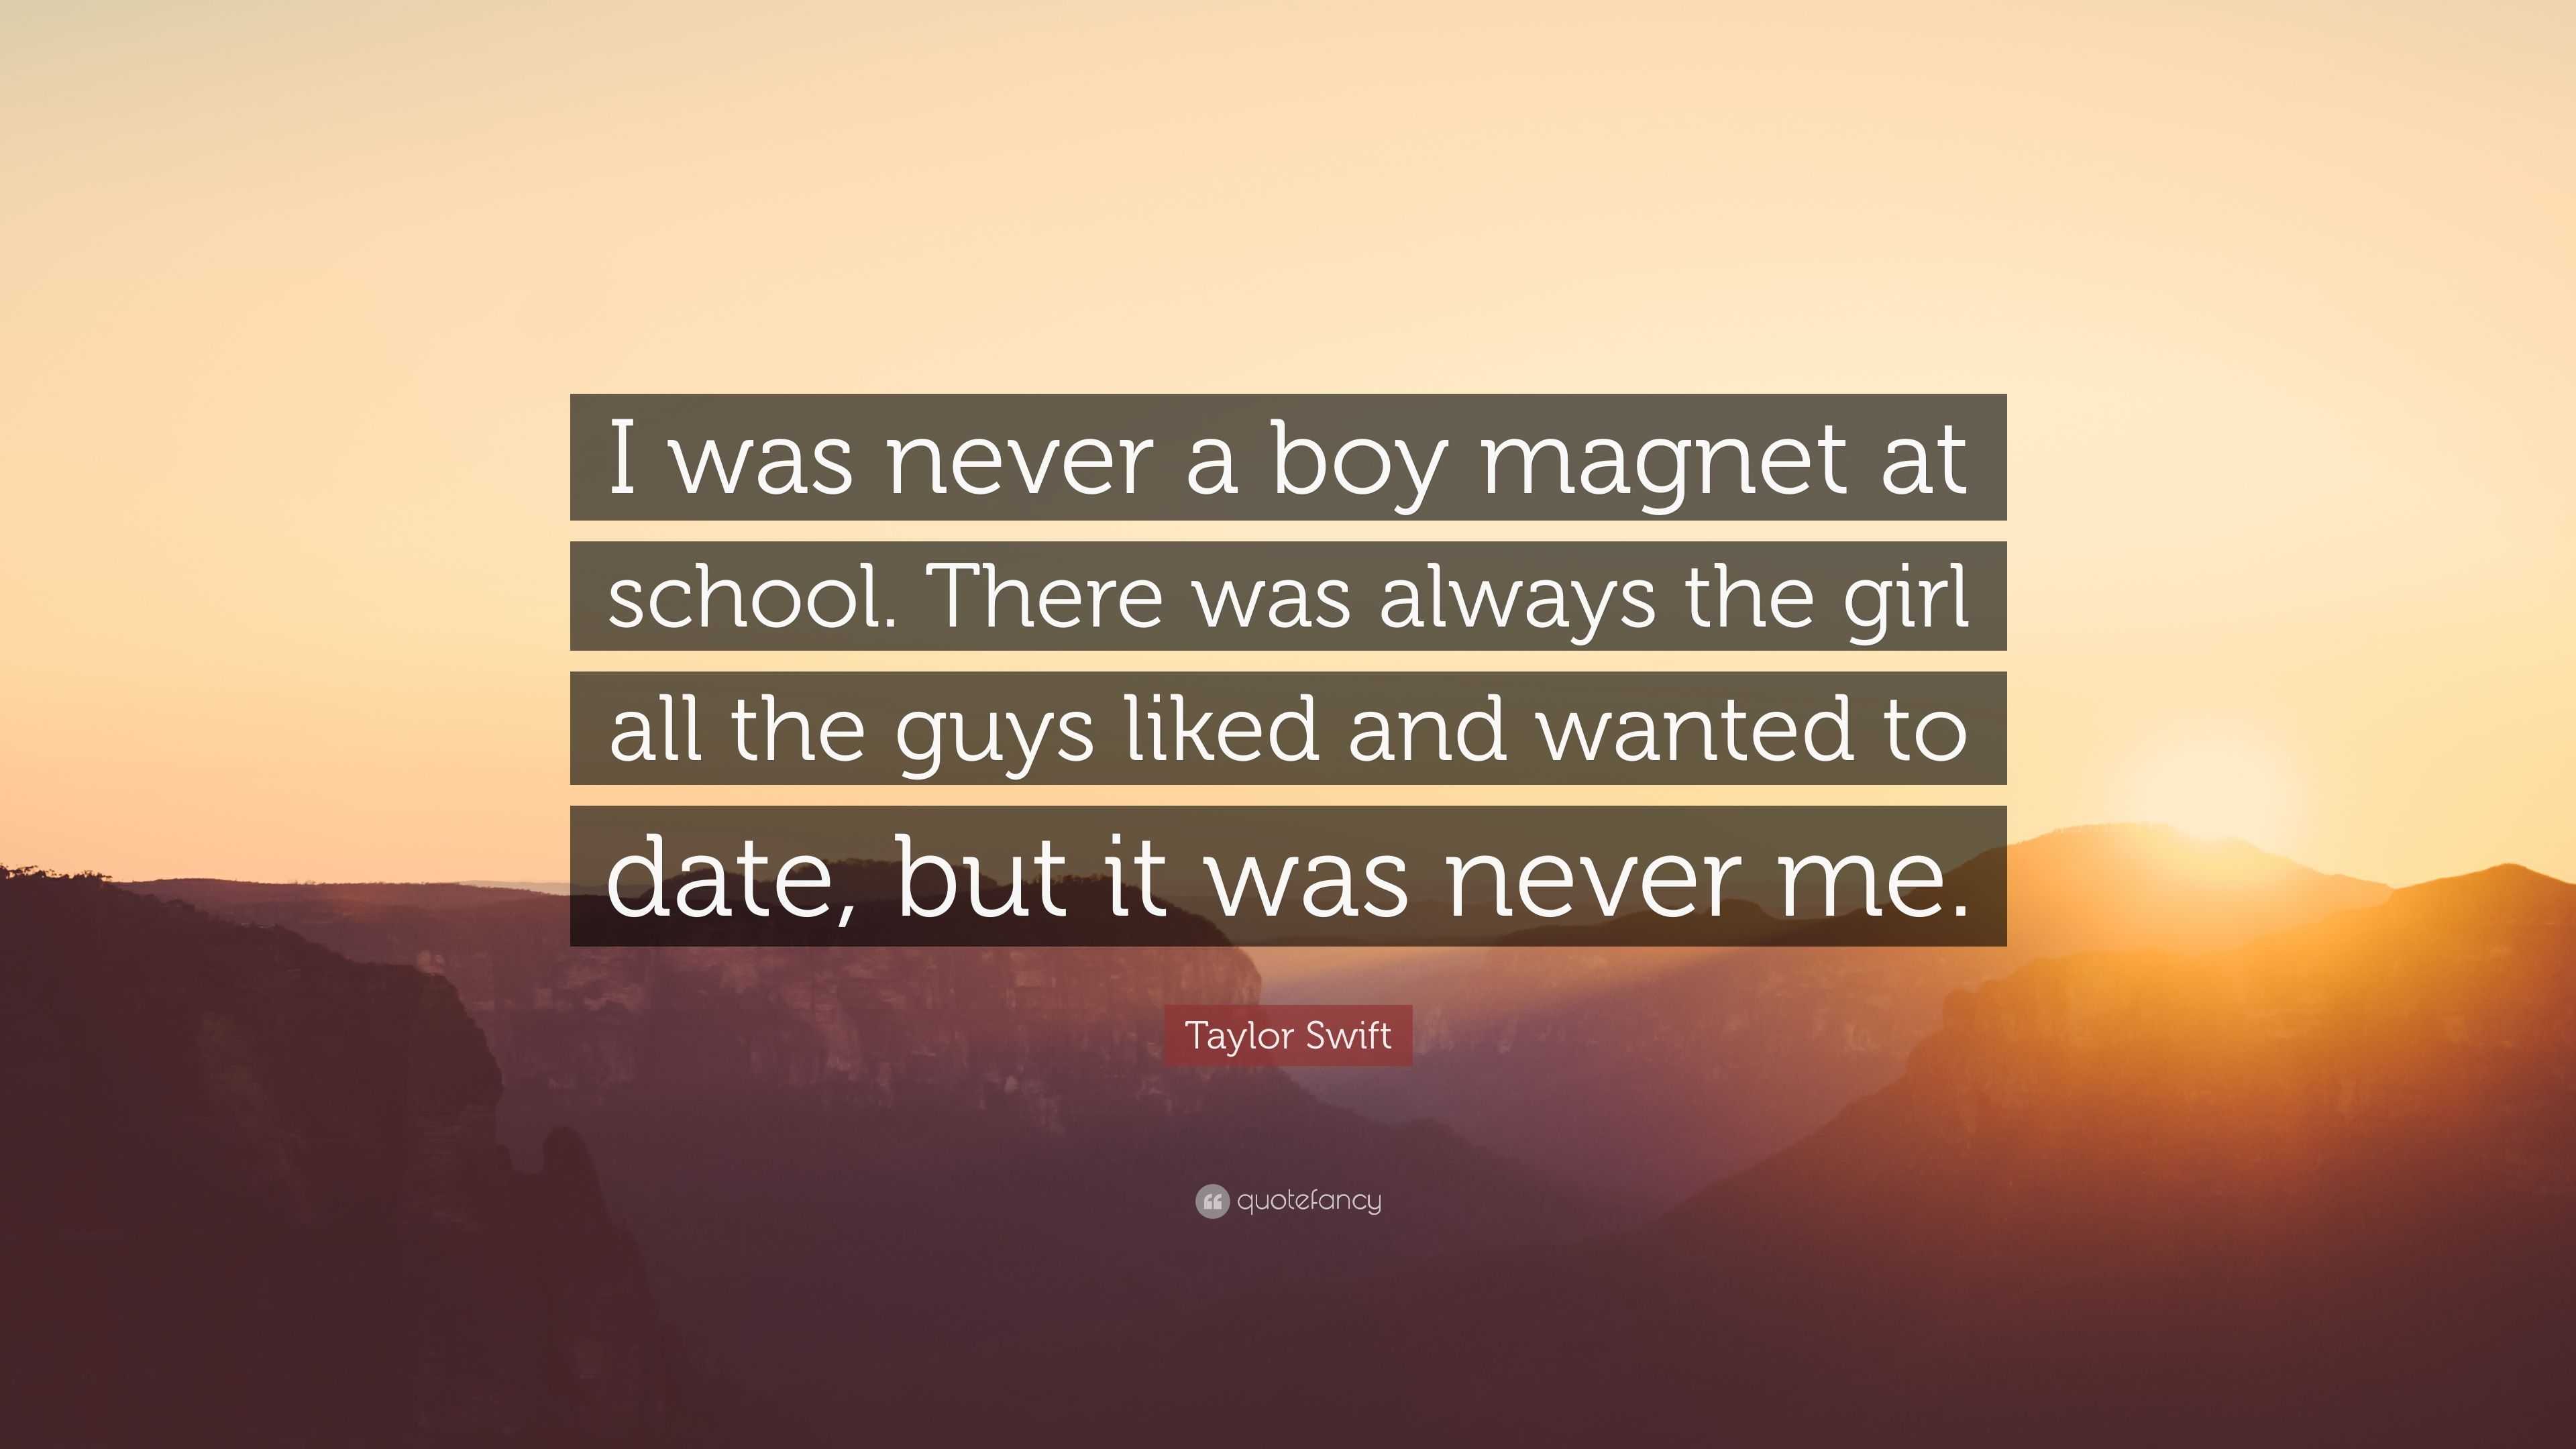 https://quotefancy.com/media/wallpaper/3840x2160/6160726-Taylor-Swift-Quote-I-was-never-a-boy-magnet-at-school-There-was.jpg